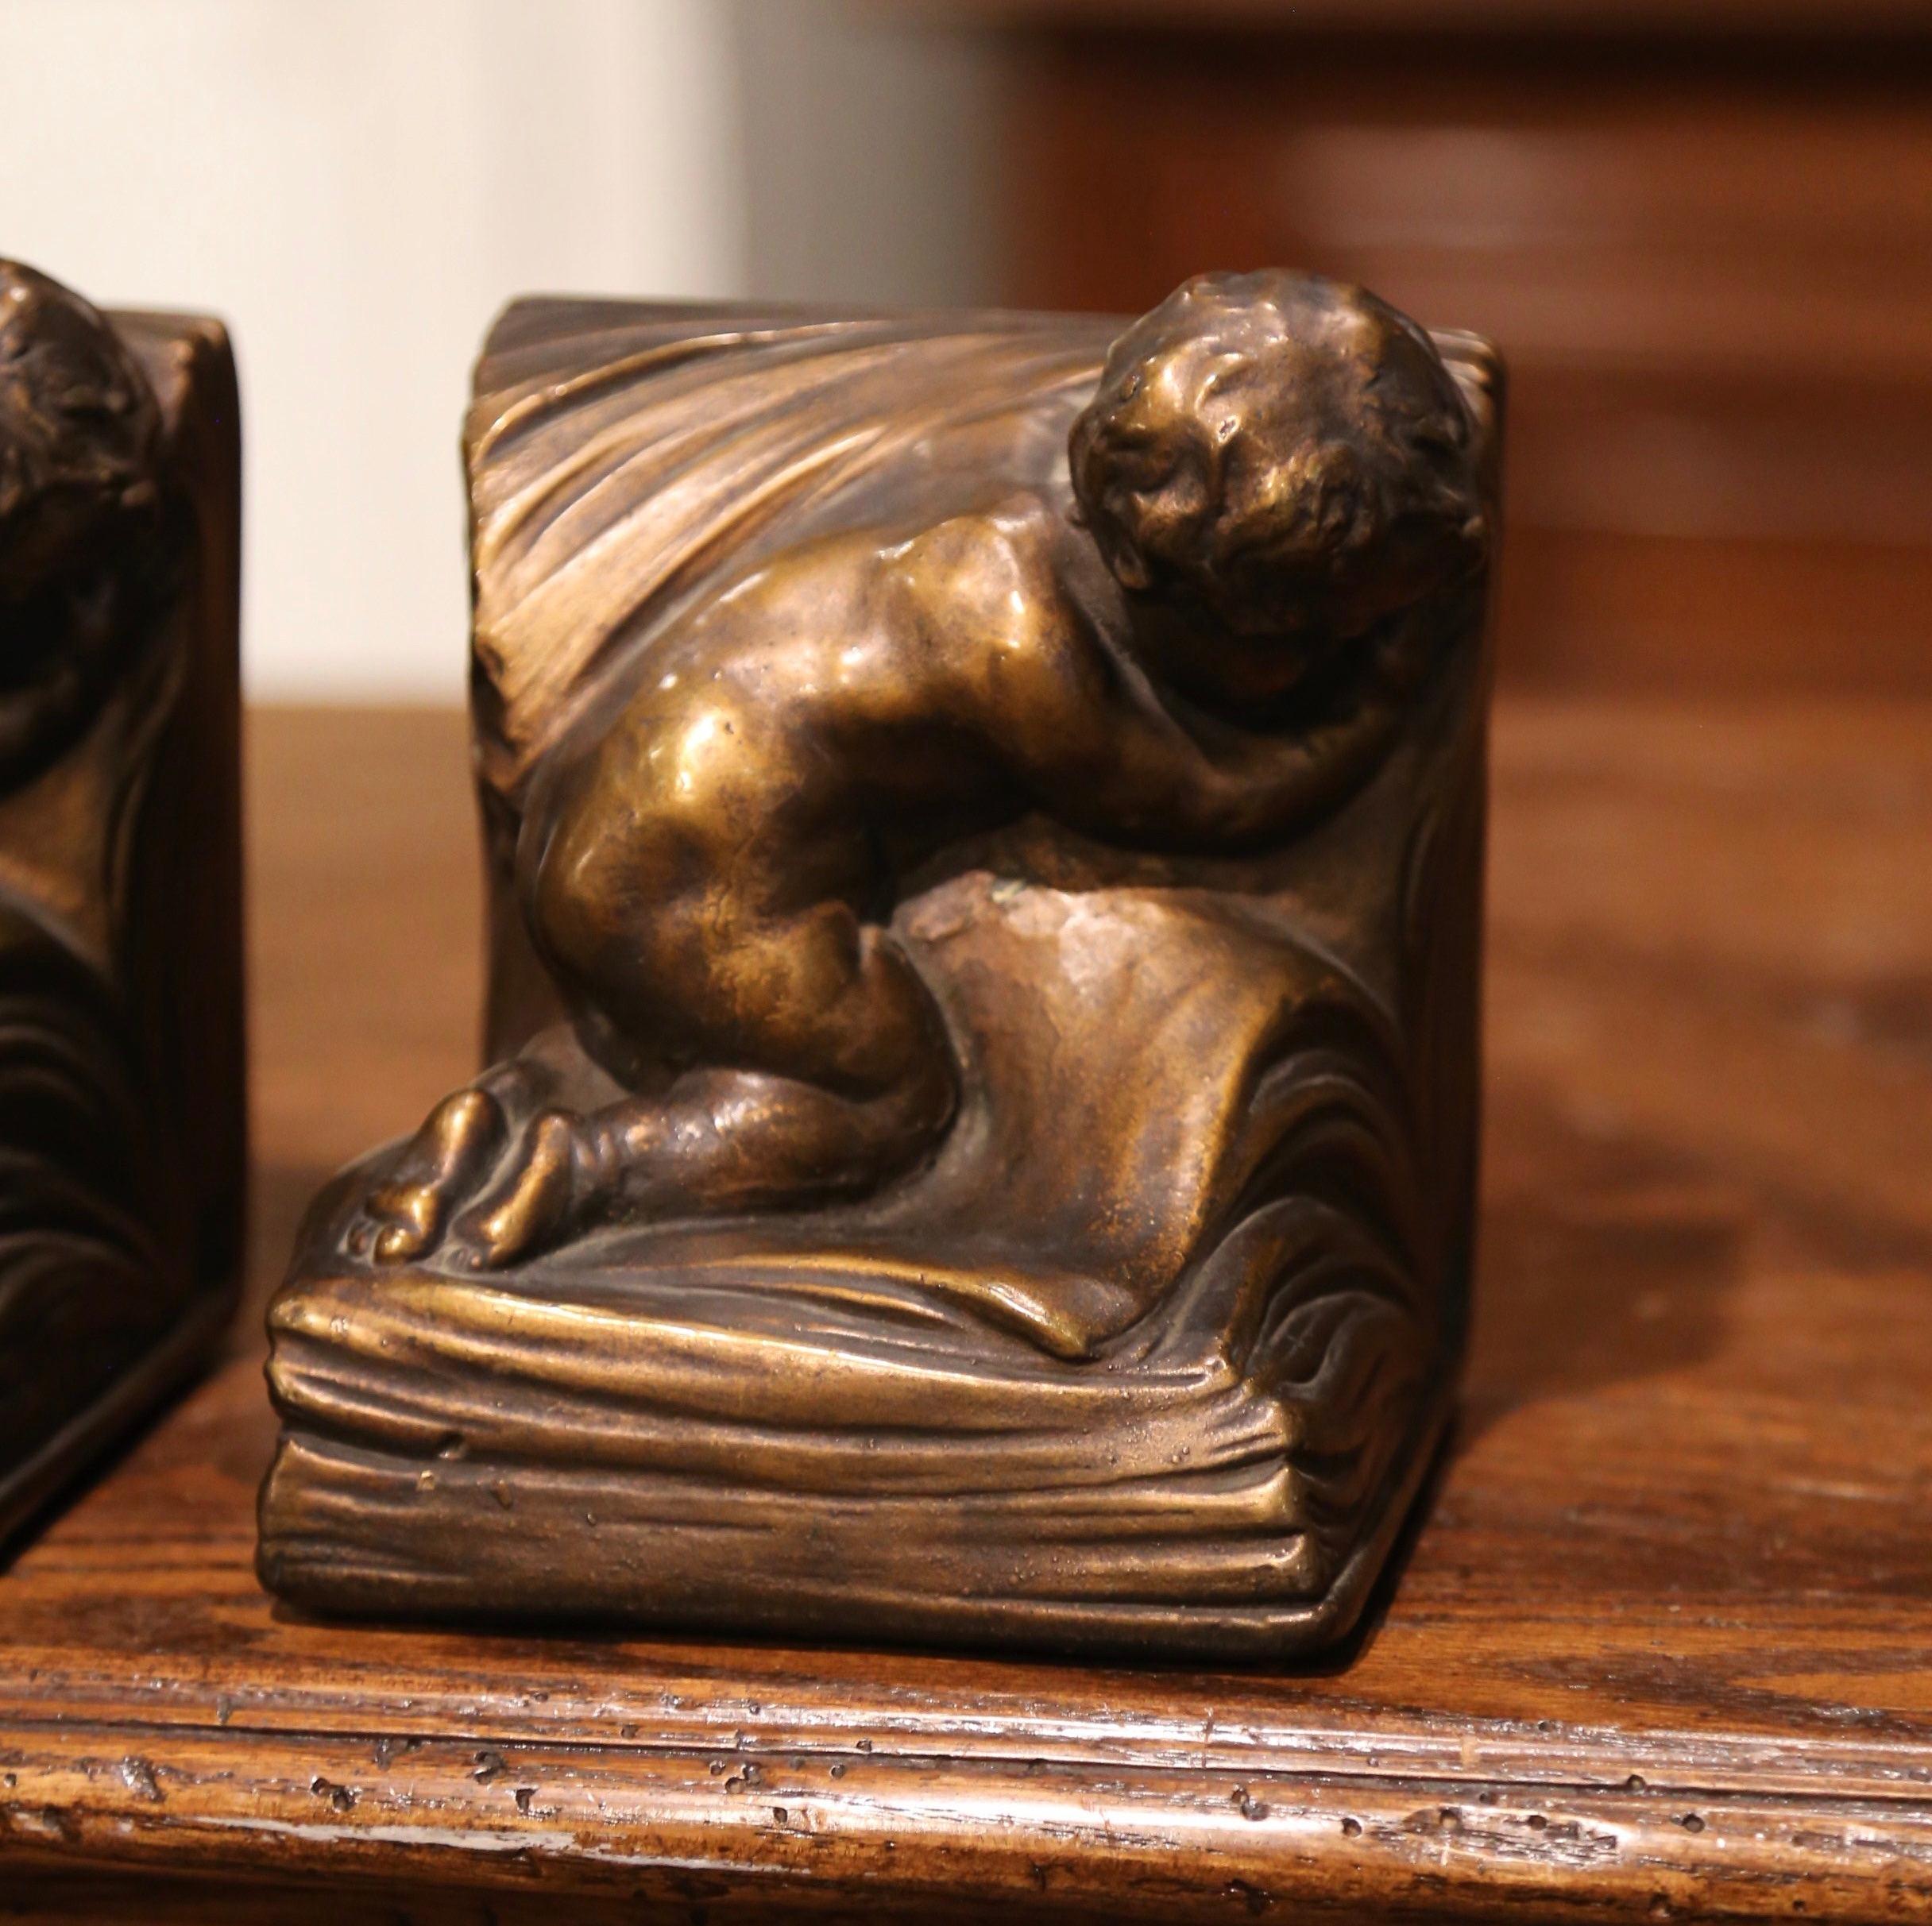 American Pair of Patinated Armor Bronze Cherub Bookends Signed and Dated CA Johnson 1914